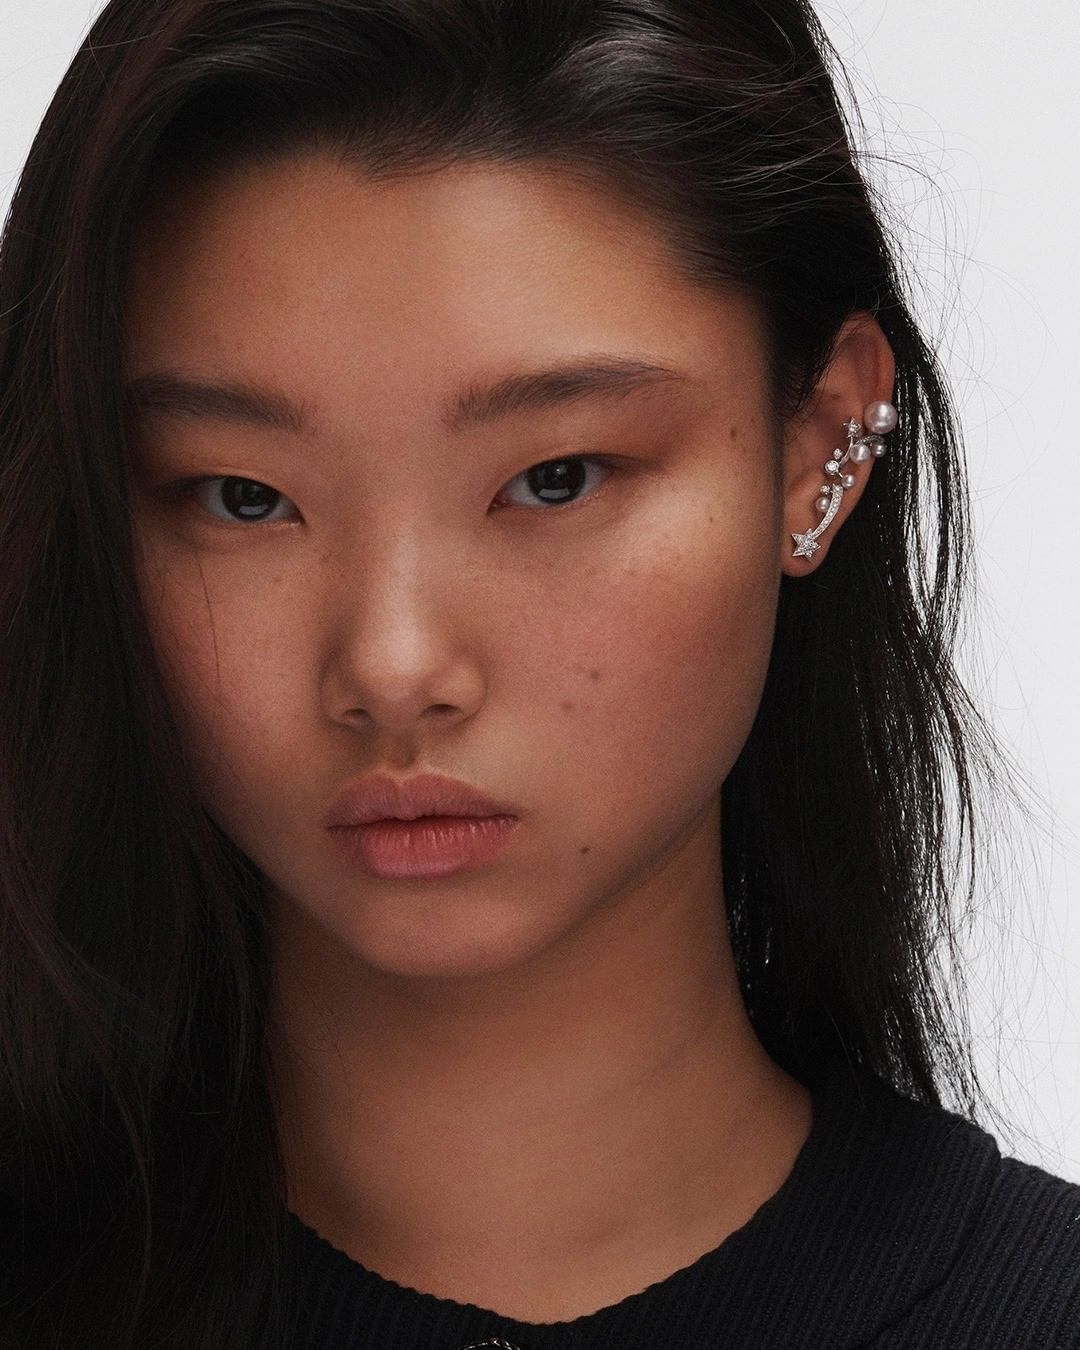 CHANEL - THE VOCABULARY OF STYLE
ACCENTUATE. One large earring worn on just one side: style is a sizable matter.

Discover CHANEL earrings. Link in bio.

#CHANELFineJewelry #chanelcomete 
@mulan_bae